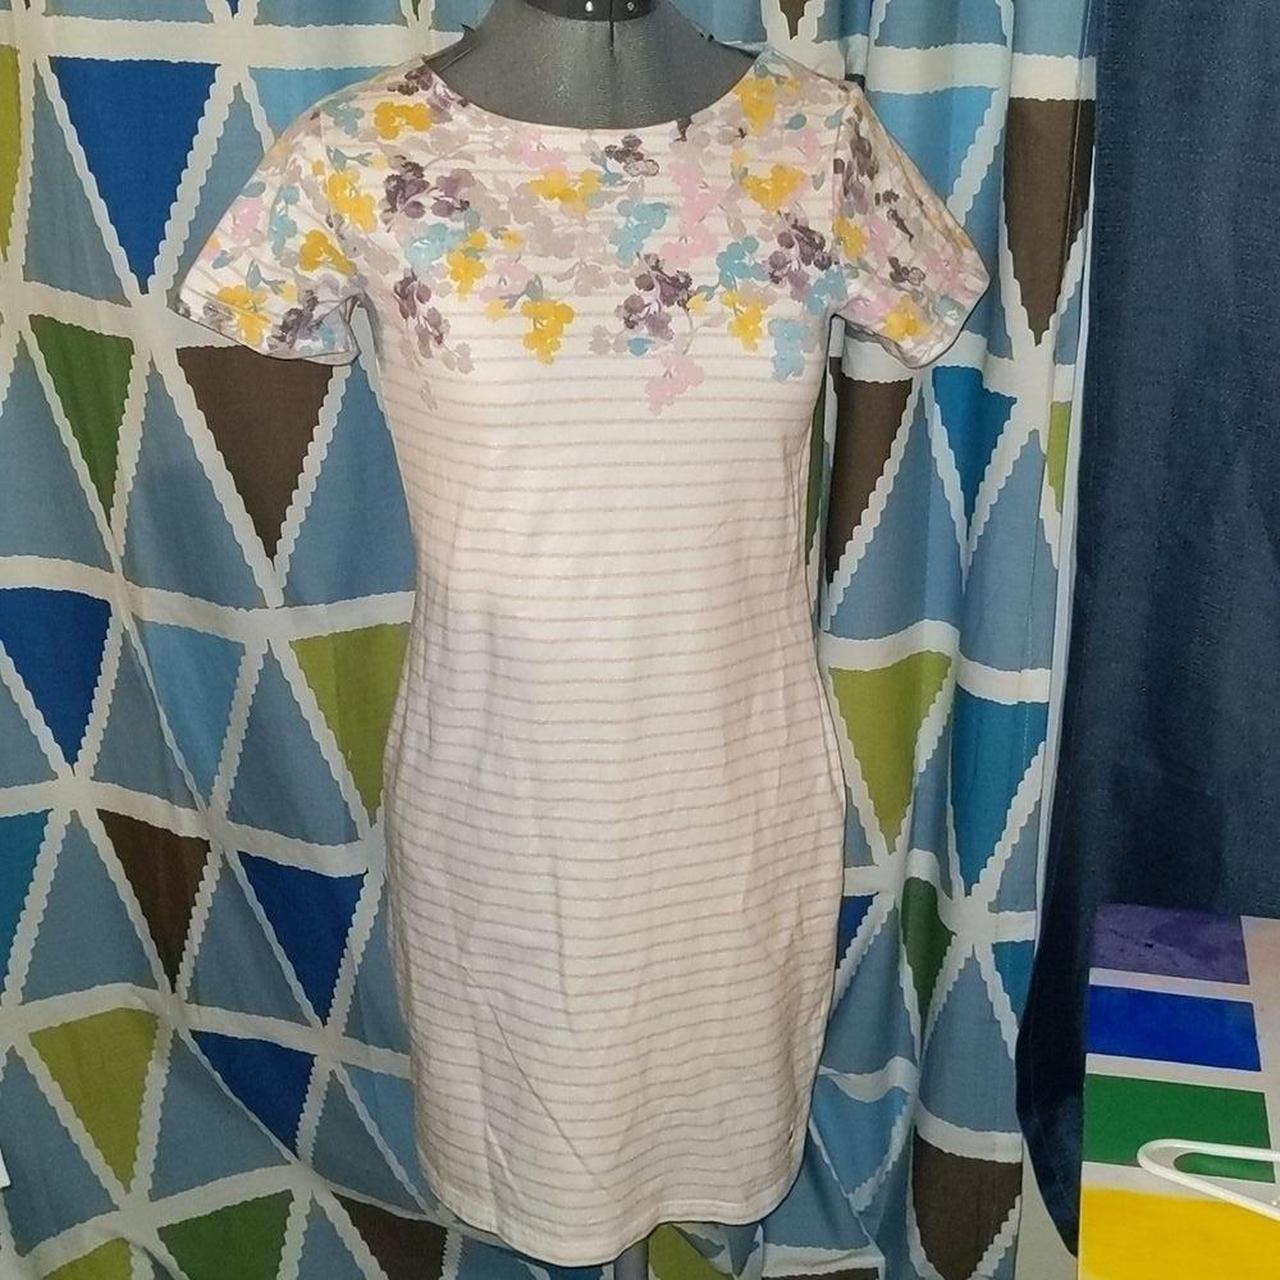 Product Image 1 - Very pretty Joules cotton dress
Striped